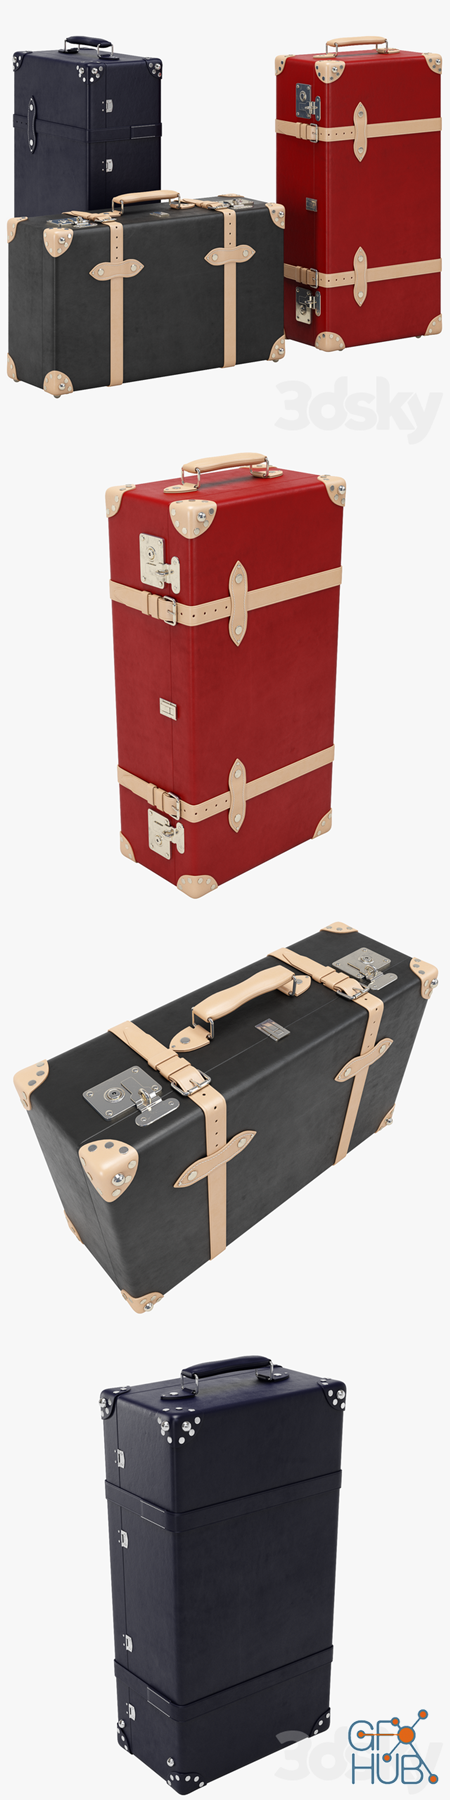 Globe Trotter Suitcases